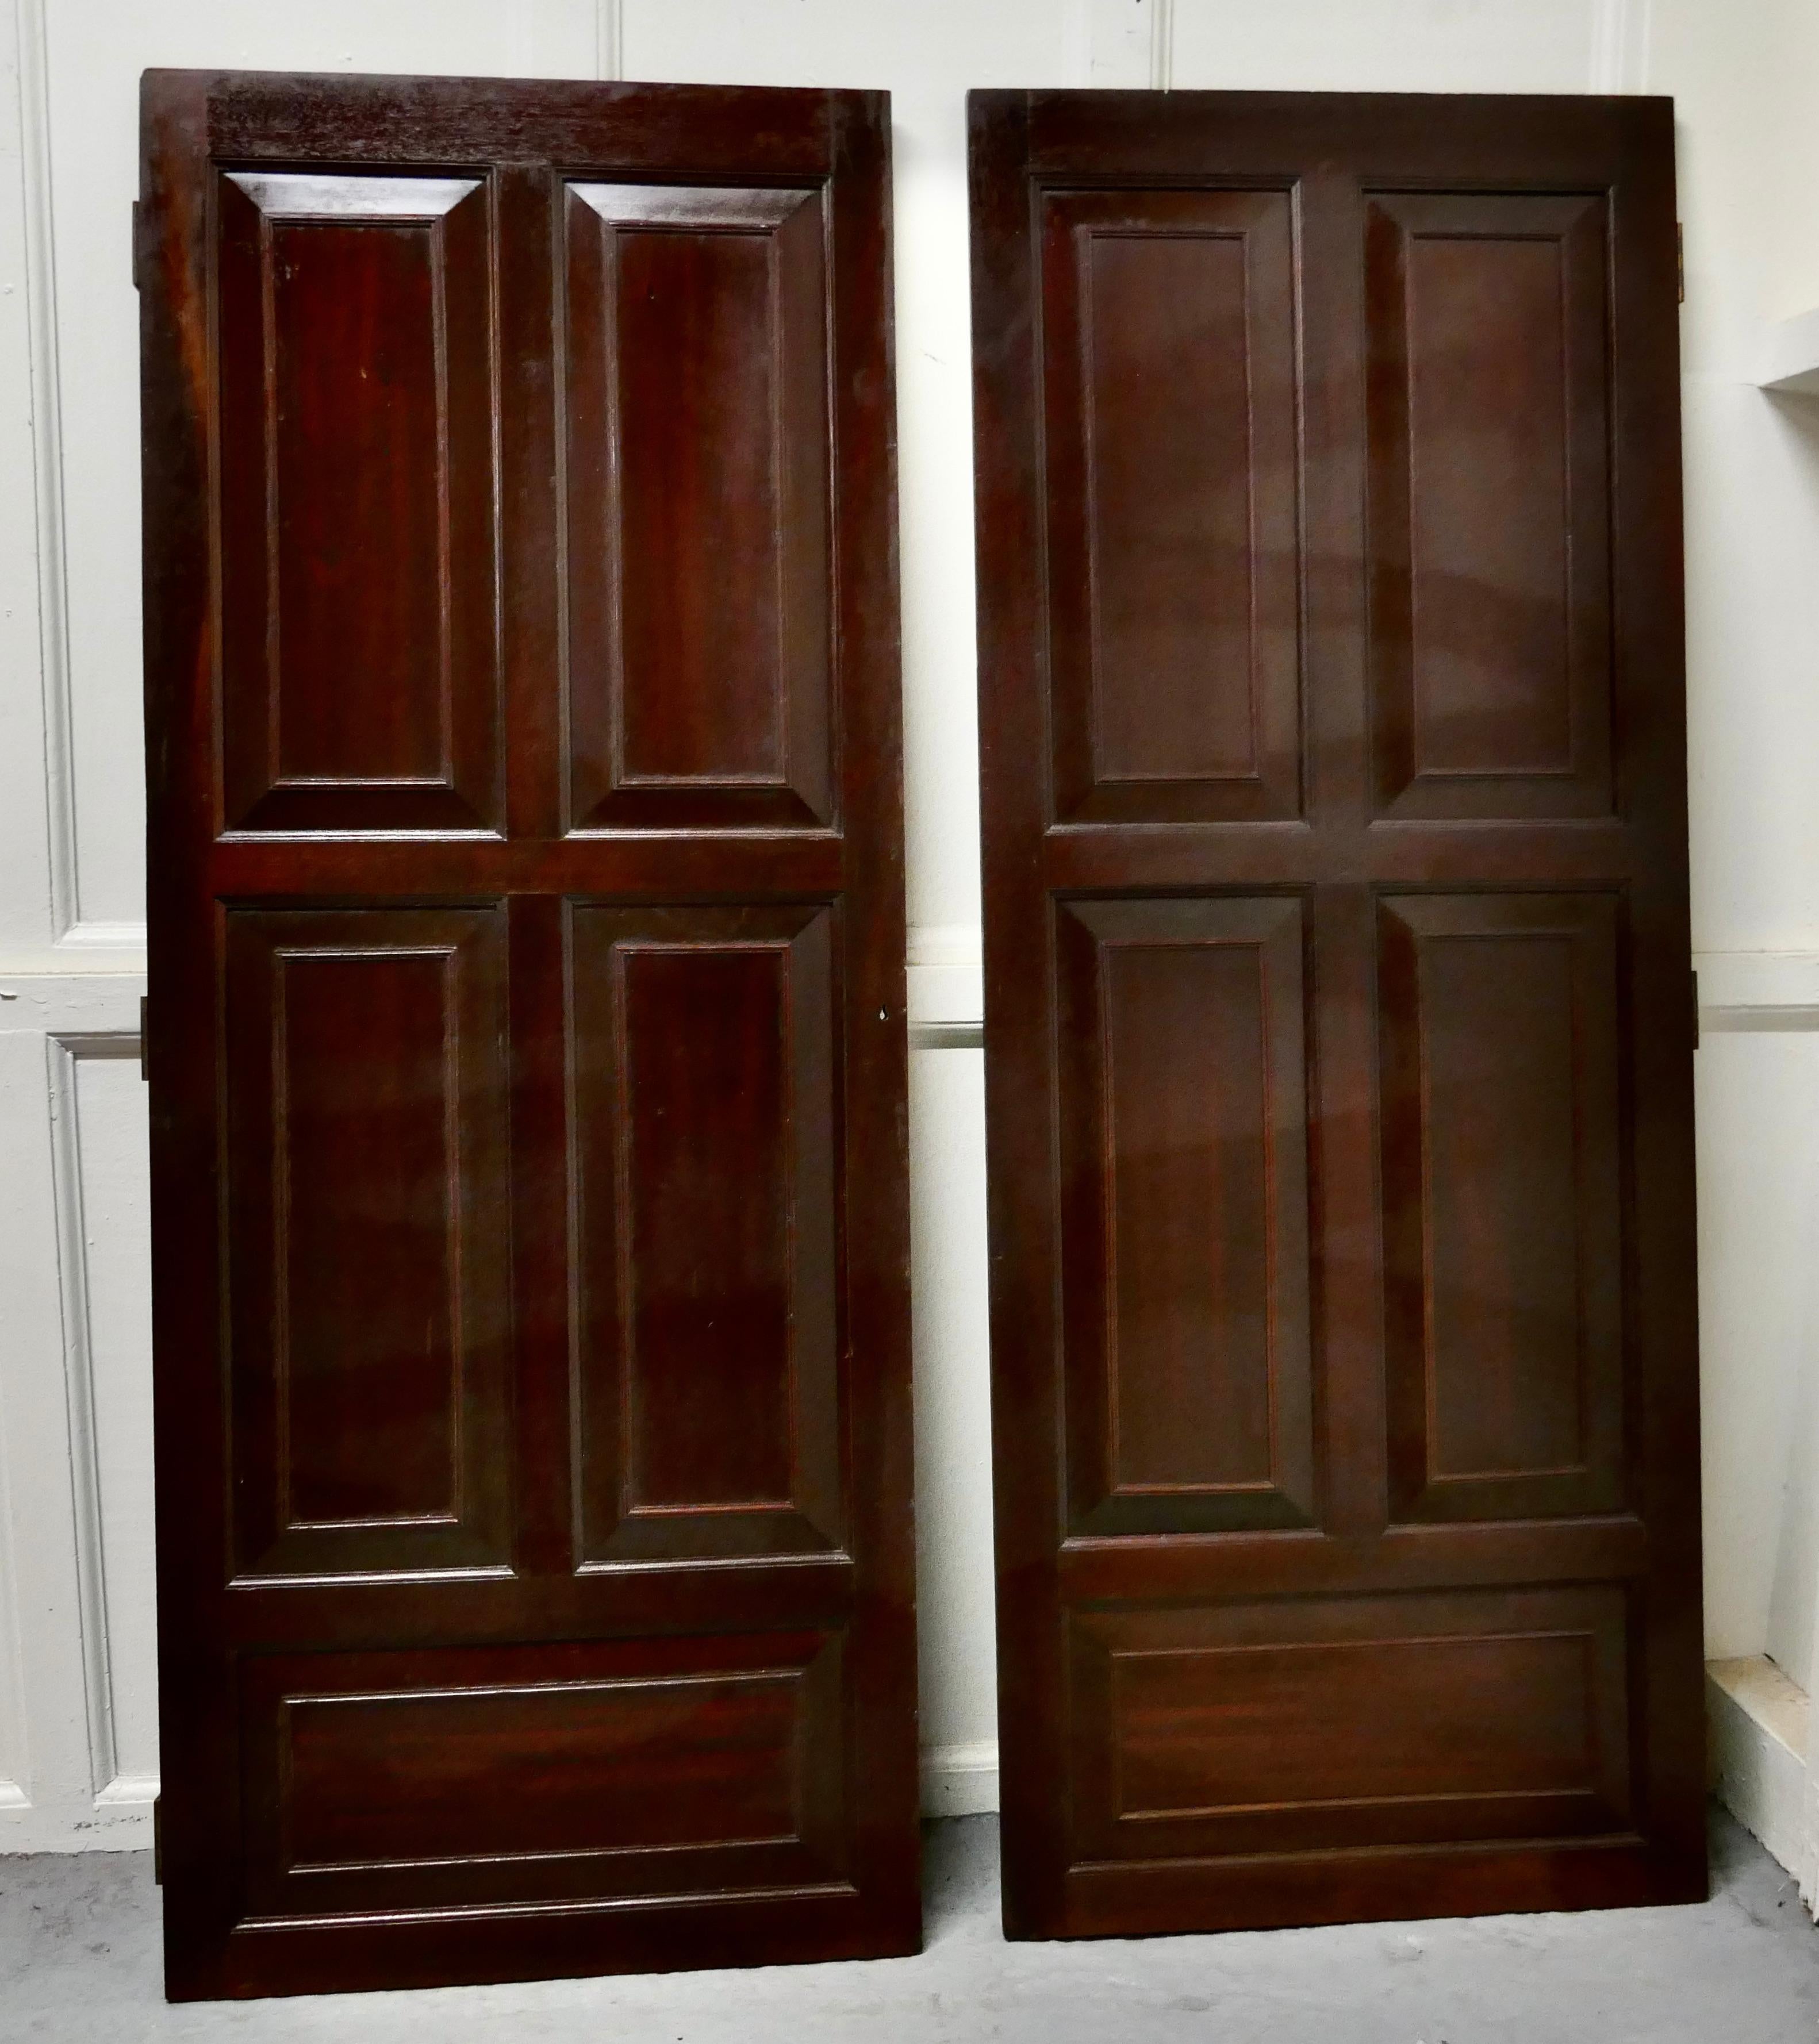 Pair of mahogany 5 panel cupboard doors 

This is a very attractive pair of mid-19th century panelled doors
The doors are in their original finish, they date from the 19th century, they are sound and made in solid wood

The doors are 56.5”